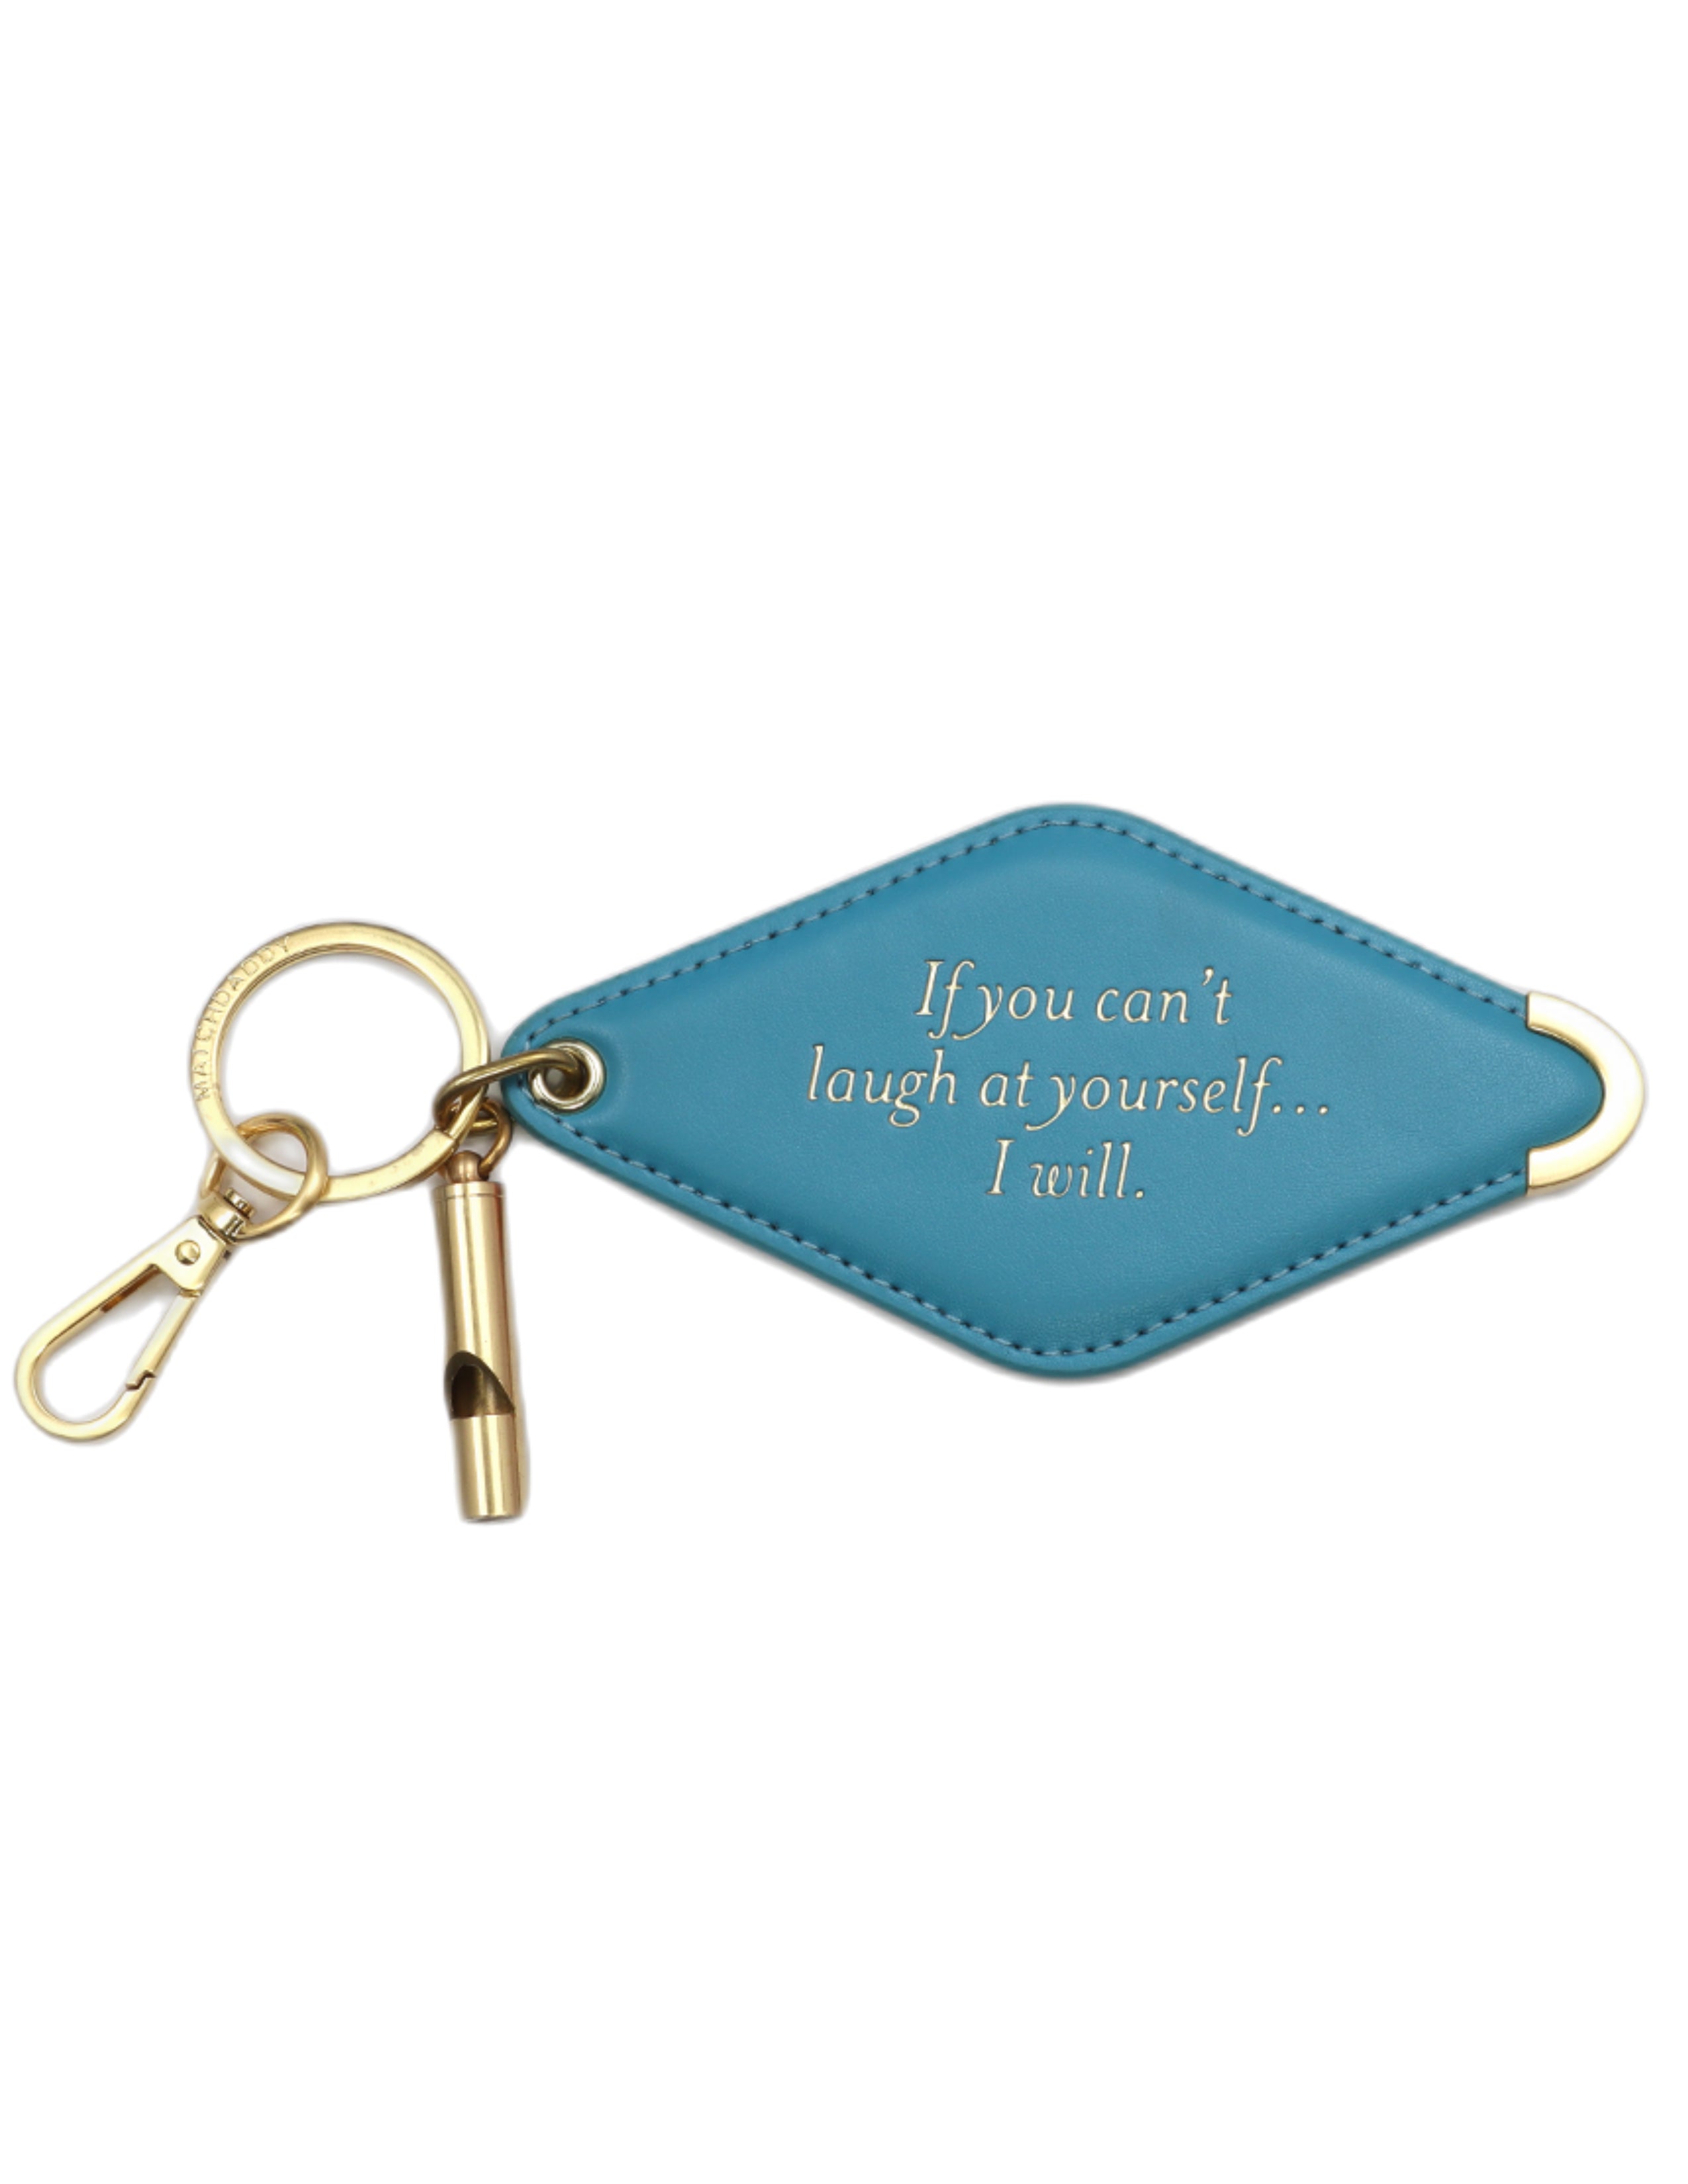 If You Can't Laugh at Yourself Key Chain